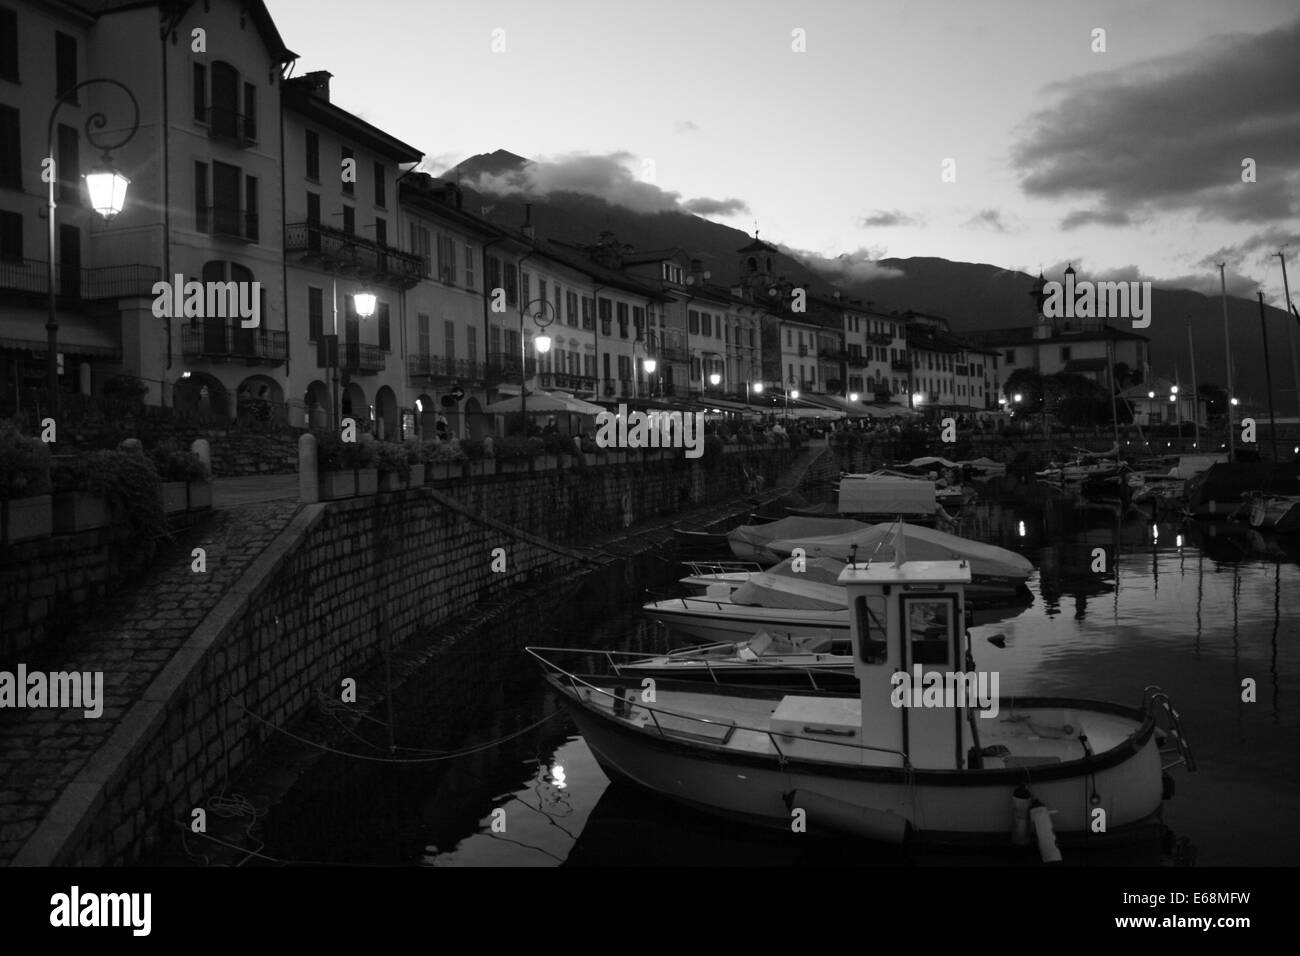 Cannobio harbour at sunset, black and white image, Lake Maggiore Stock Photo